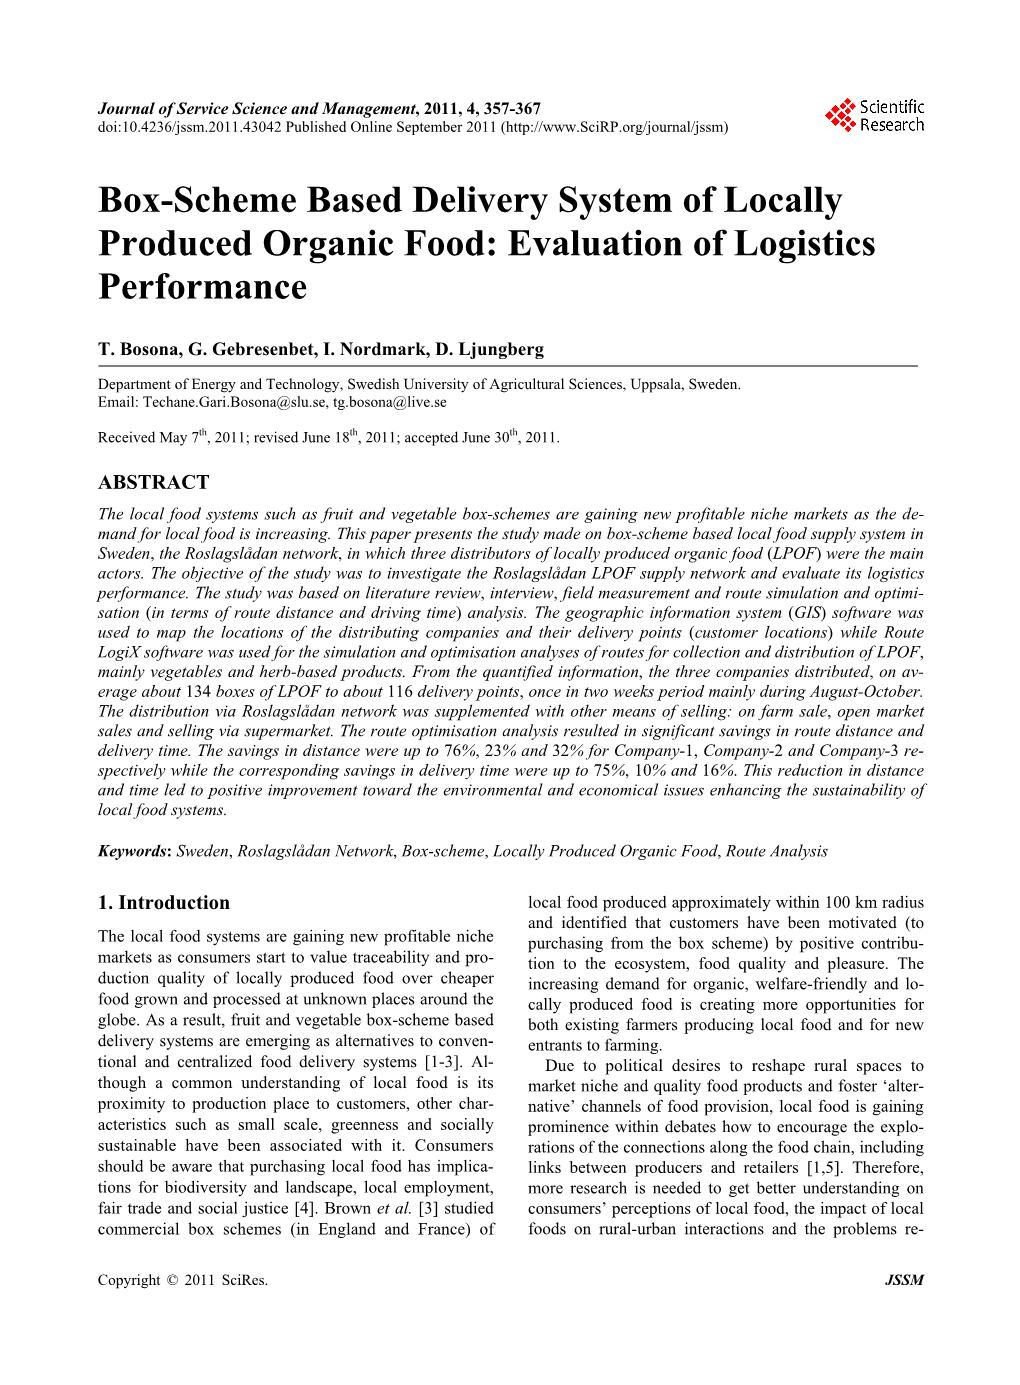 Box-Scheme Based Delivery System of Locally Produced Organic Food: Evaluation of Logistics Performance